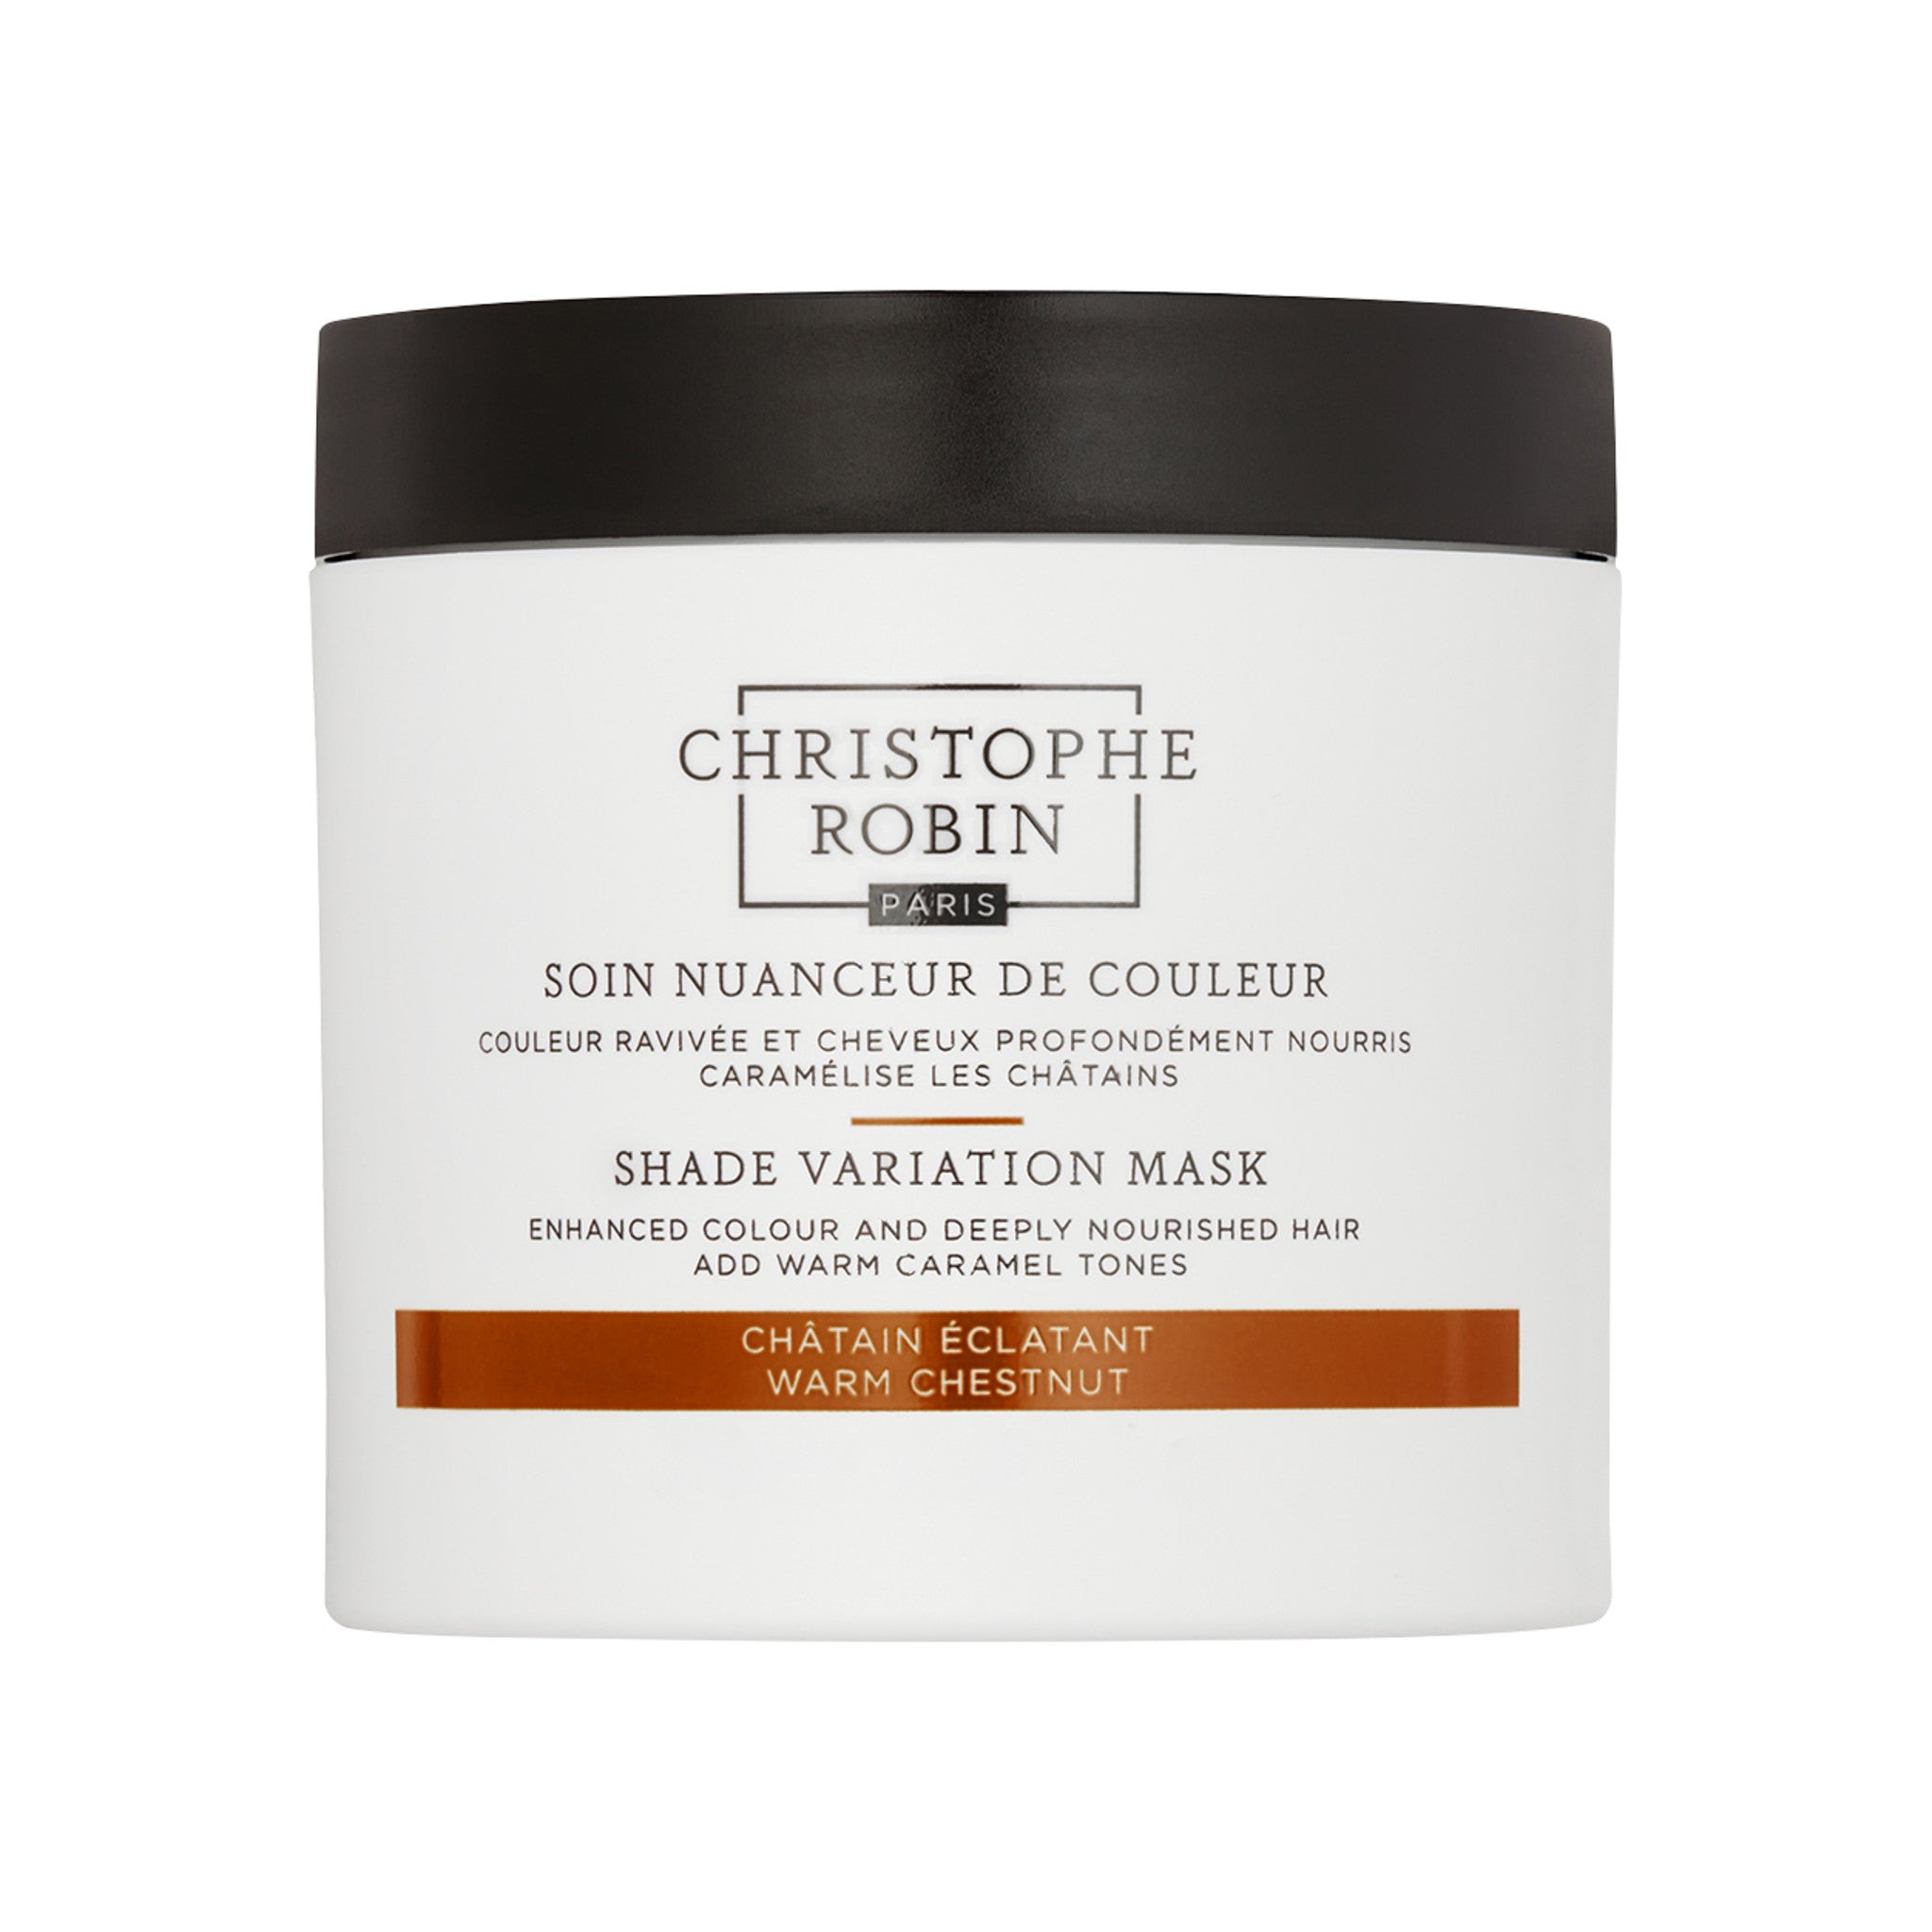 Christophe Robin Shade Variation Mask Warm Chestnut main image. This product is for brown hair